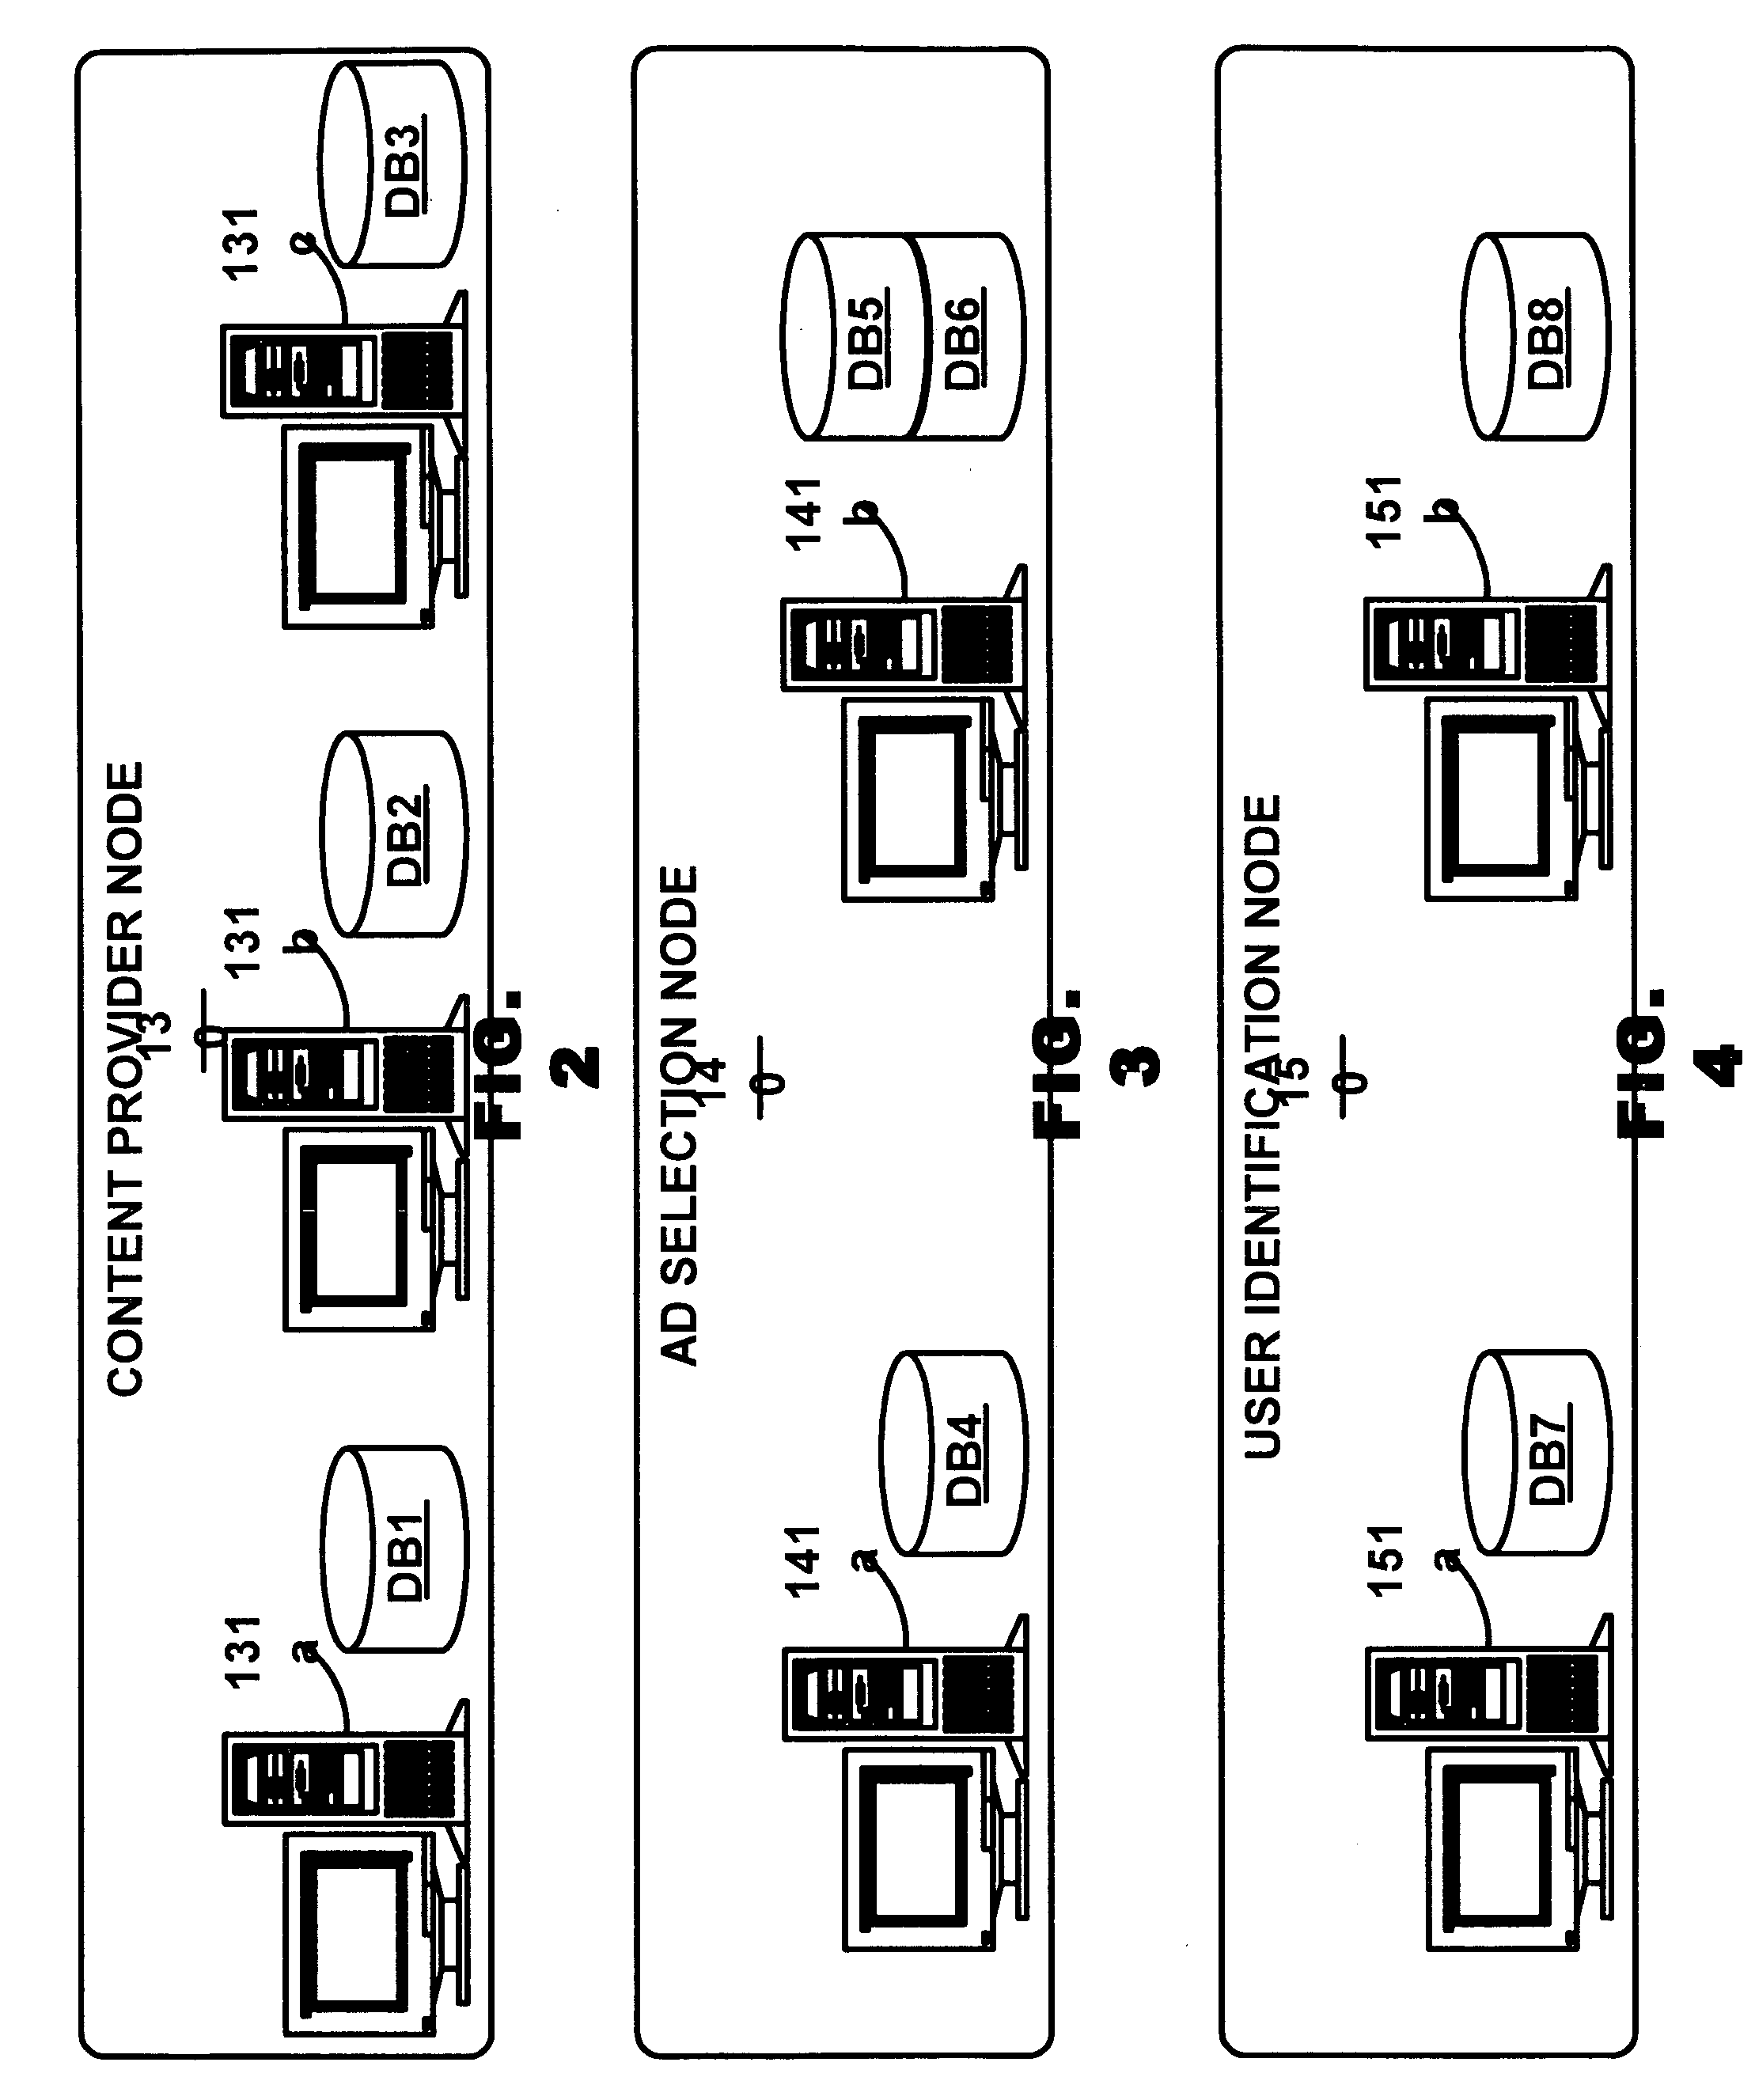 Method and system for providing network based target advertising and encapsulation